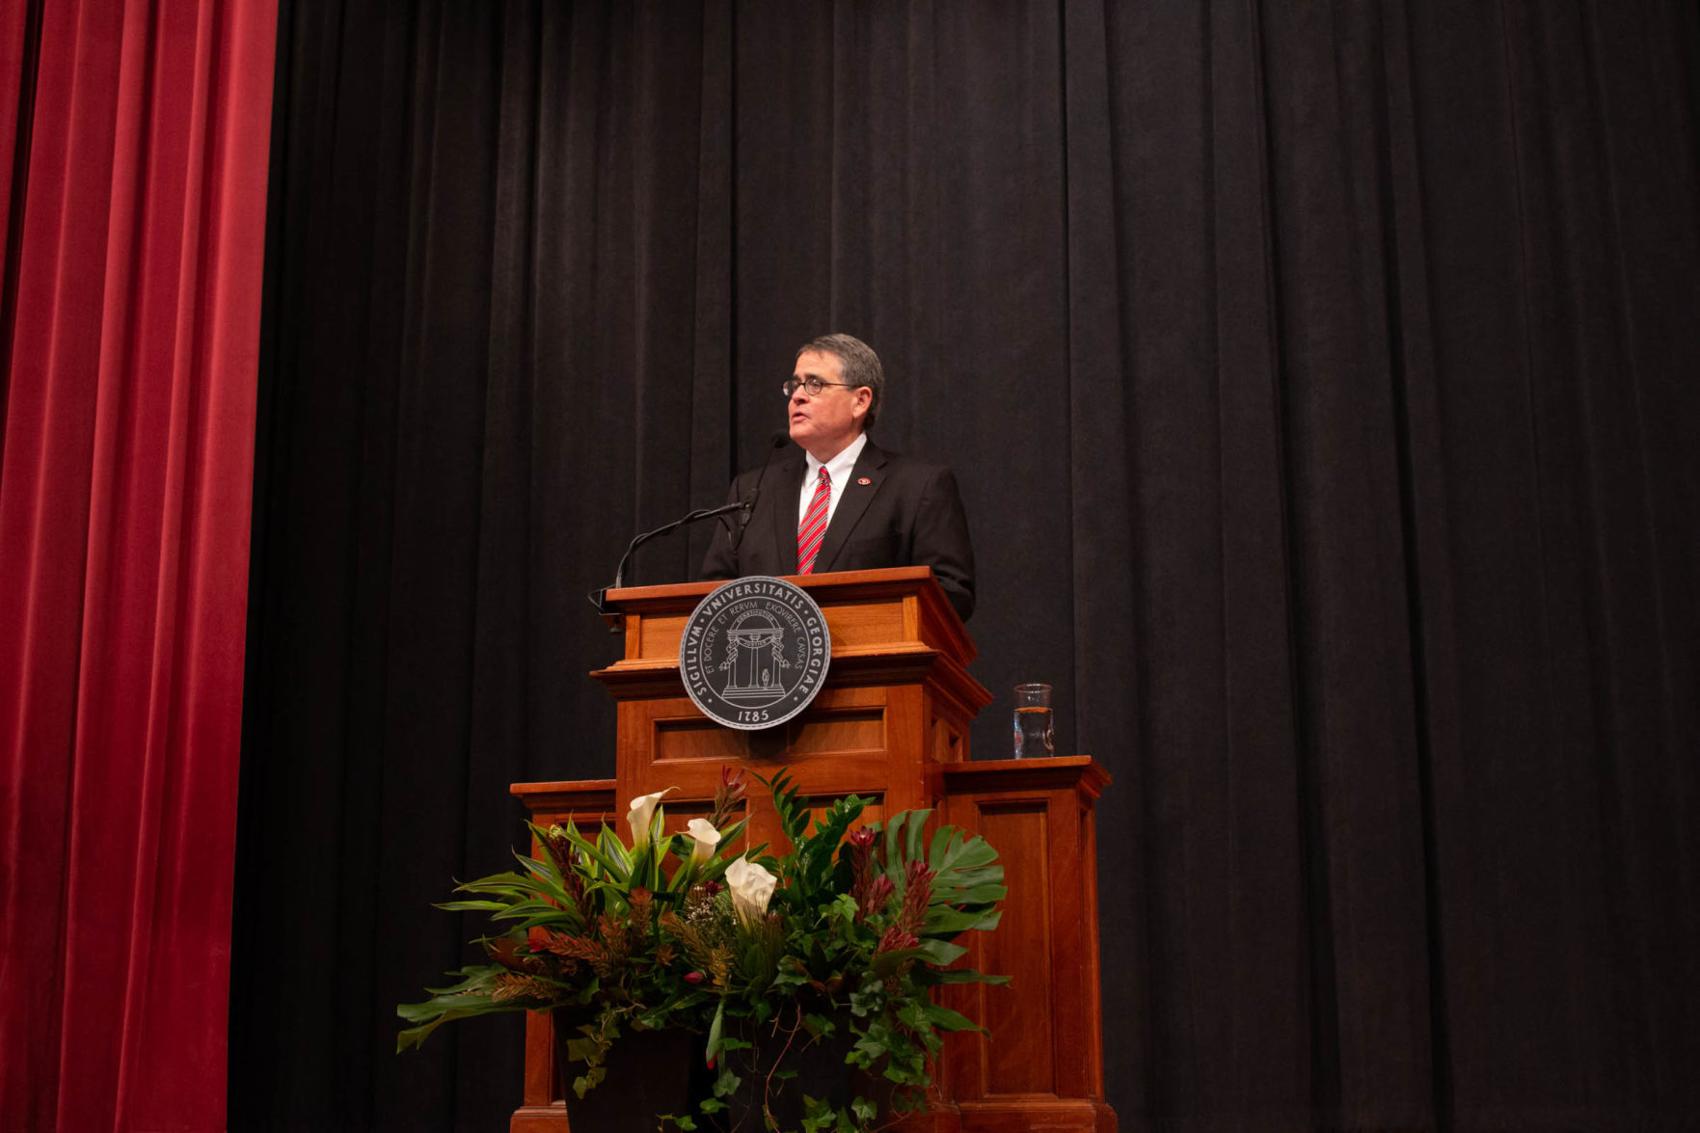 President Jere Morehead standing at a podium speaking